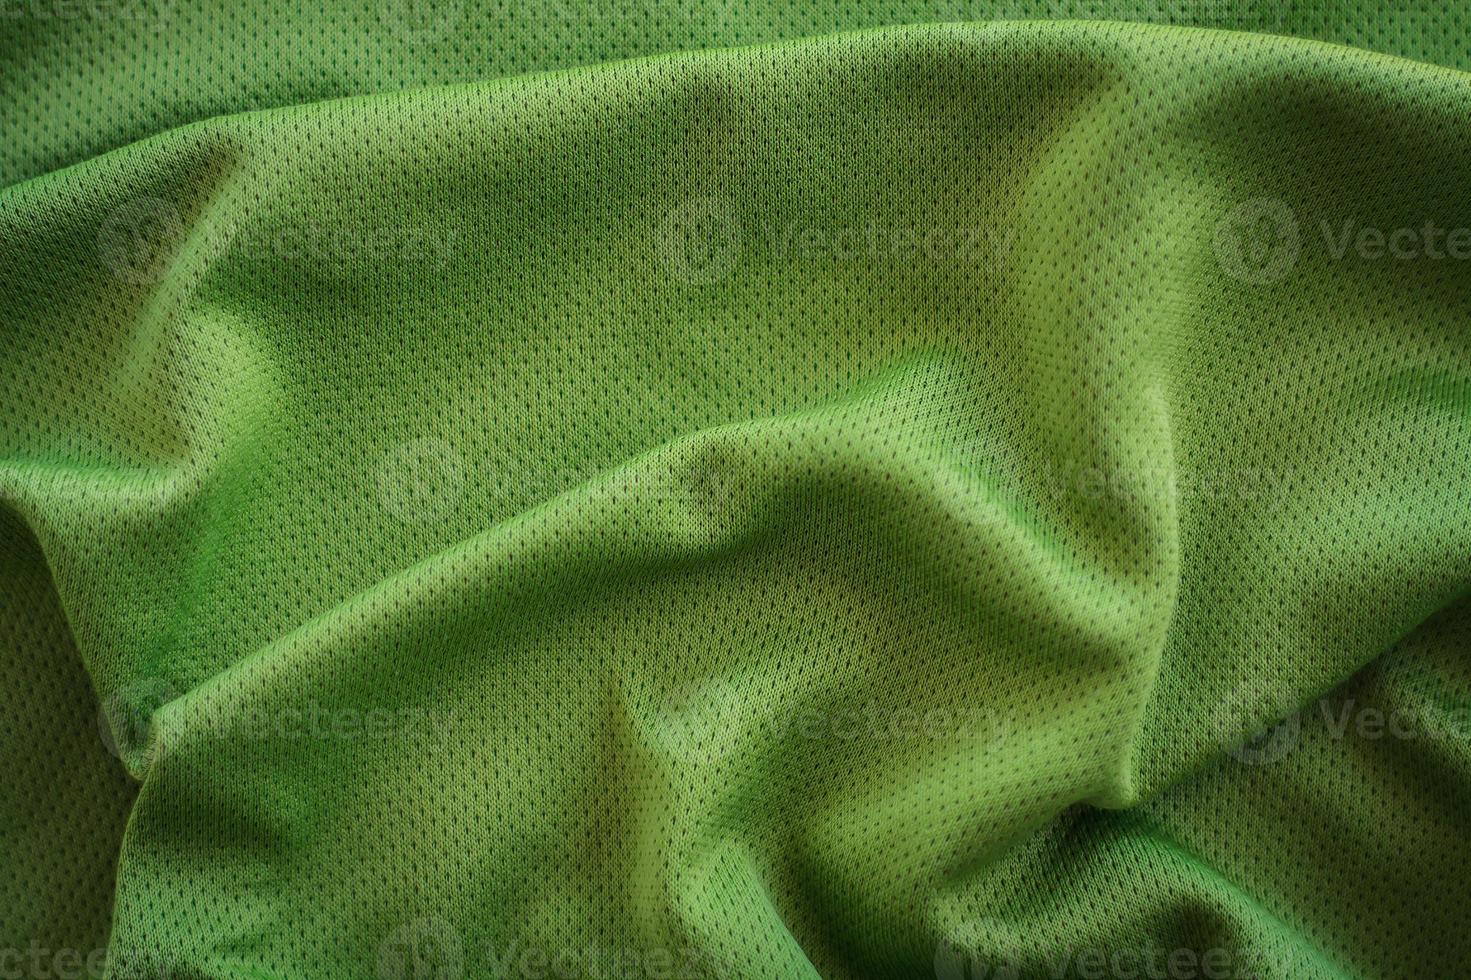 crumpled green fabric texture background photo